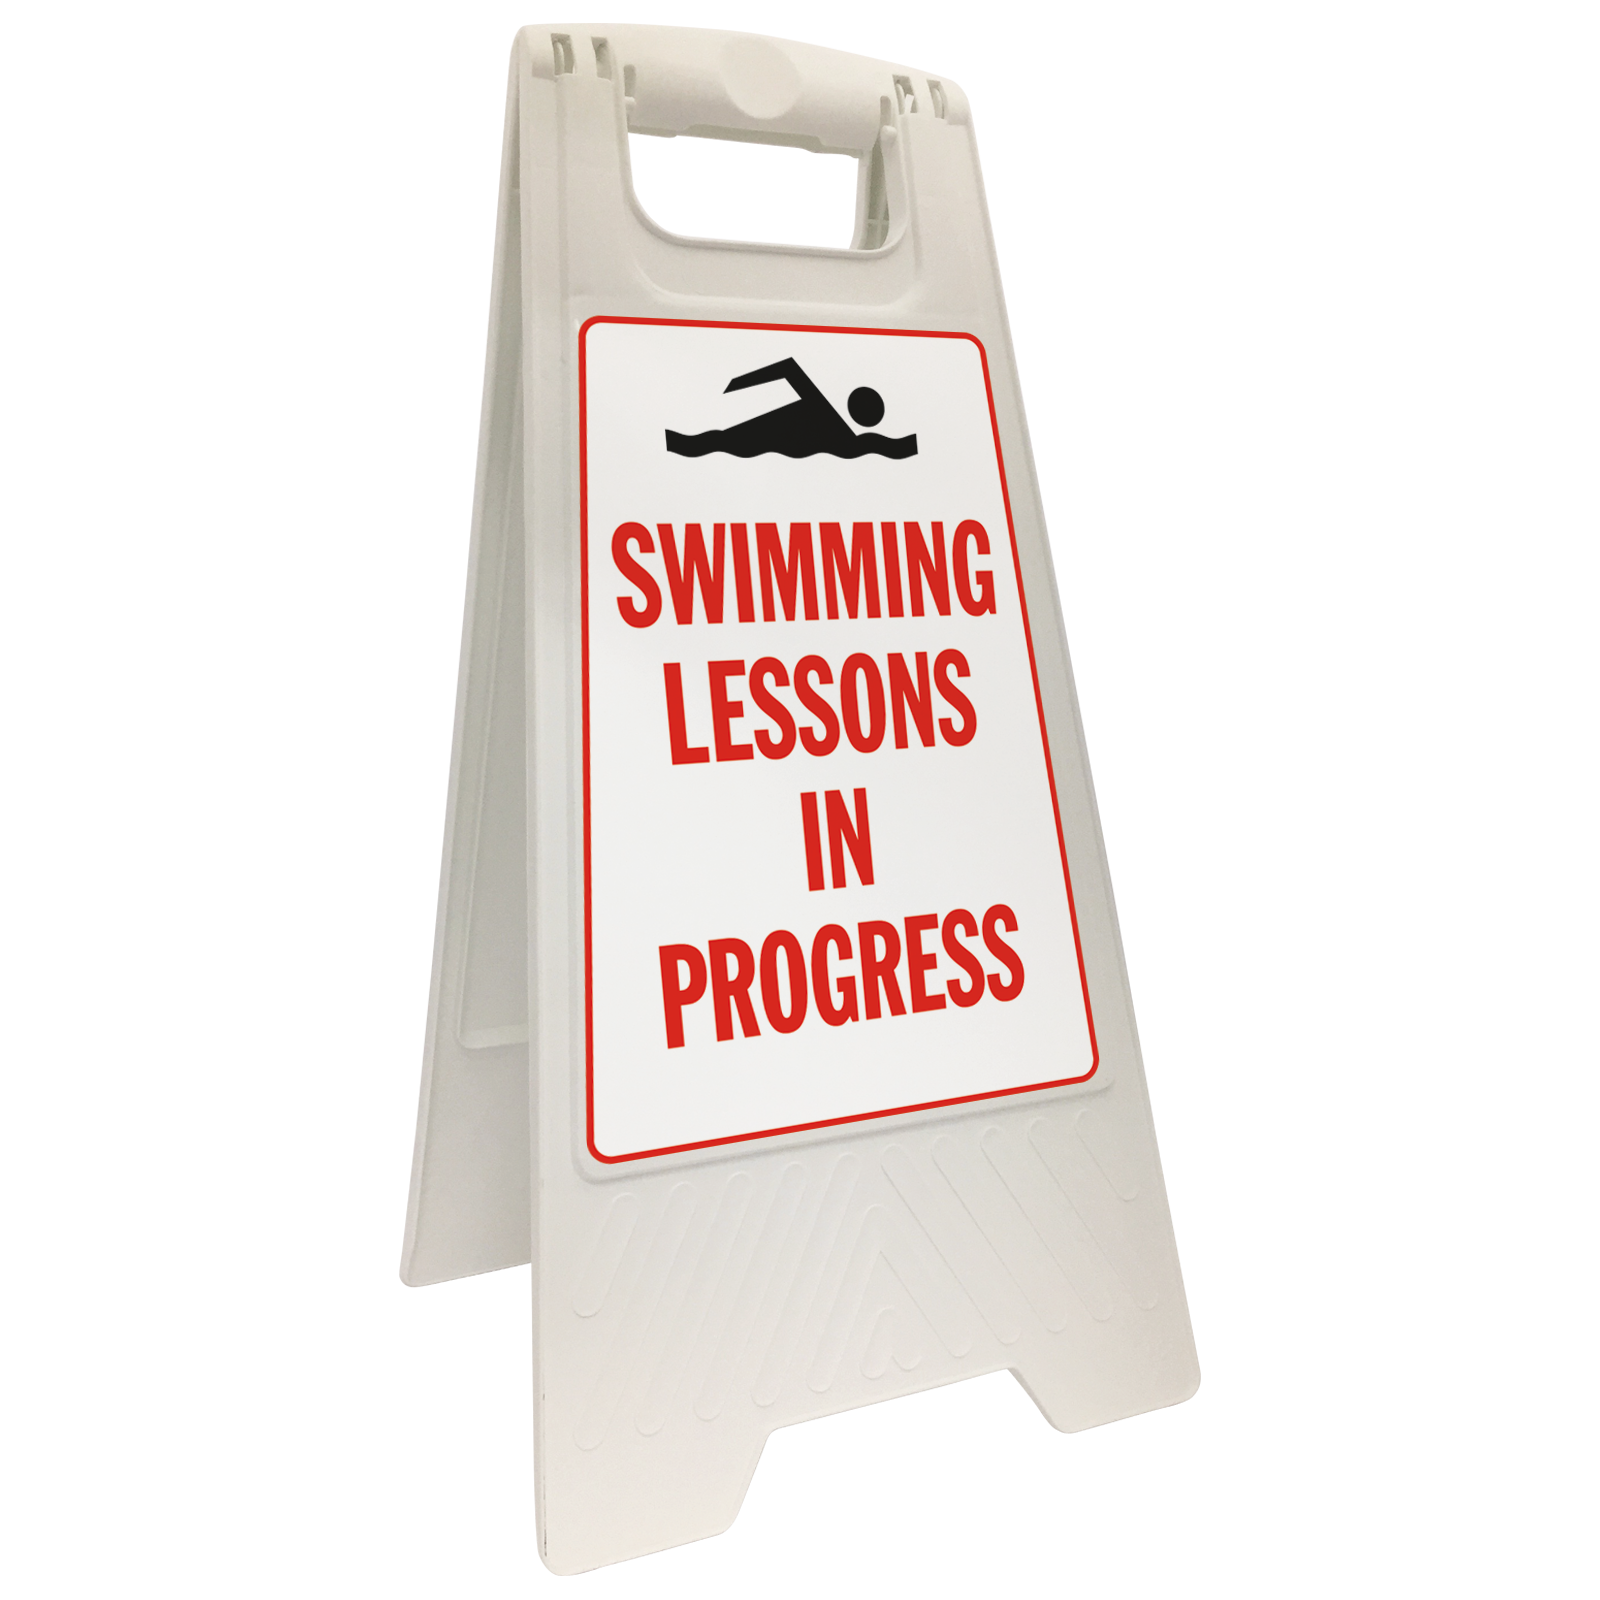 Swimming lessons in progress sign